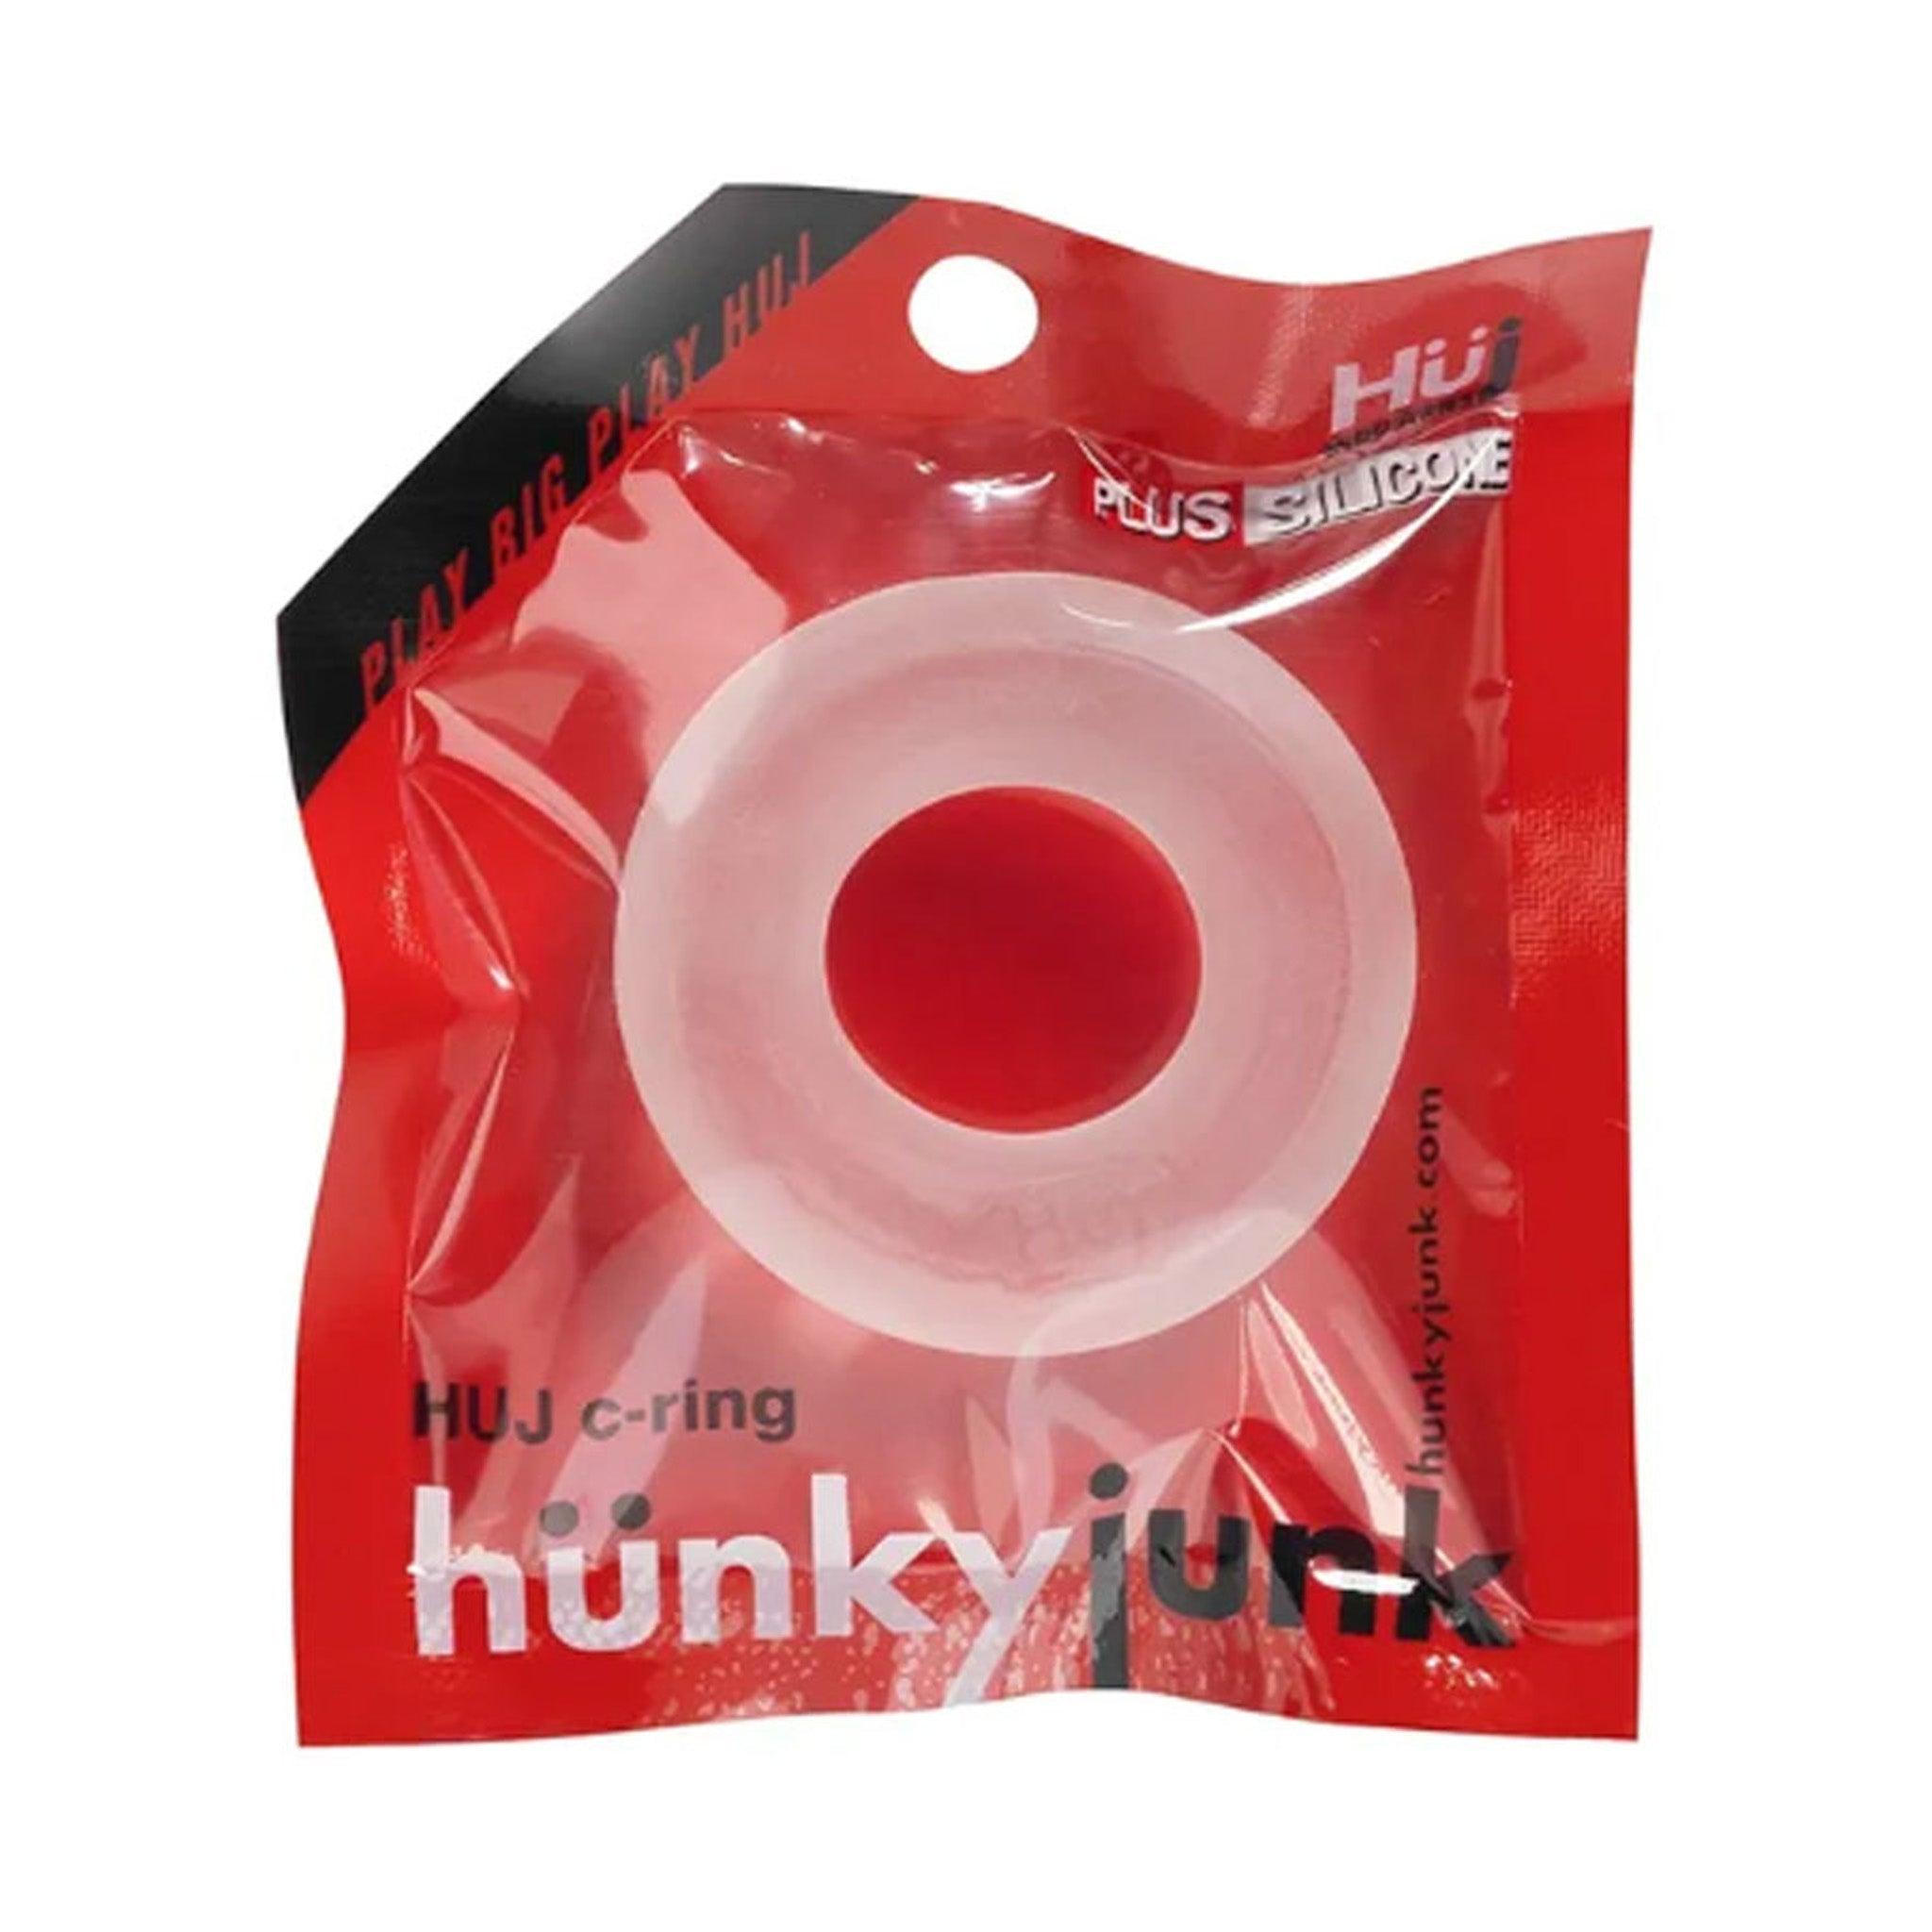 hunky junk HUJ Silicone Blend Ring - Opaque/Clear - CheapLubes.com